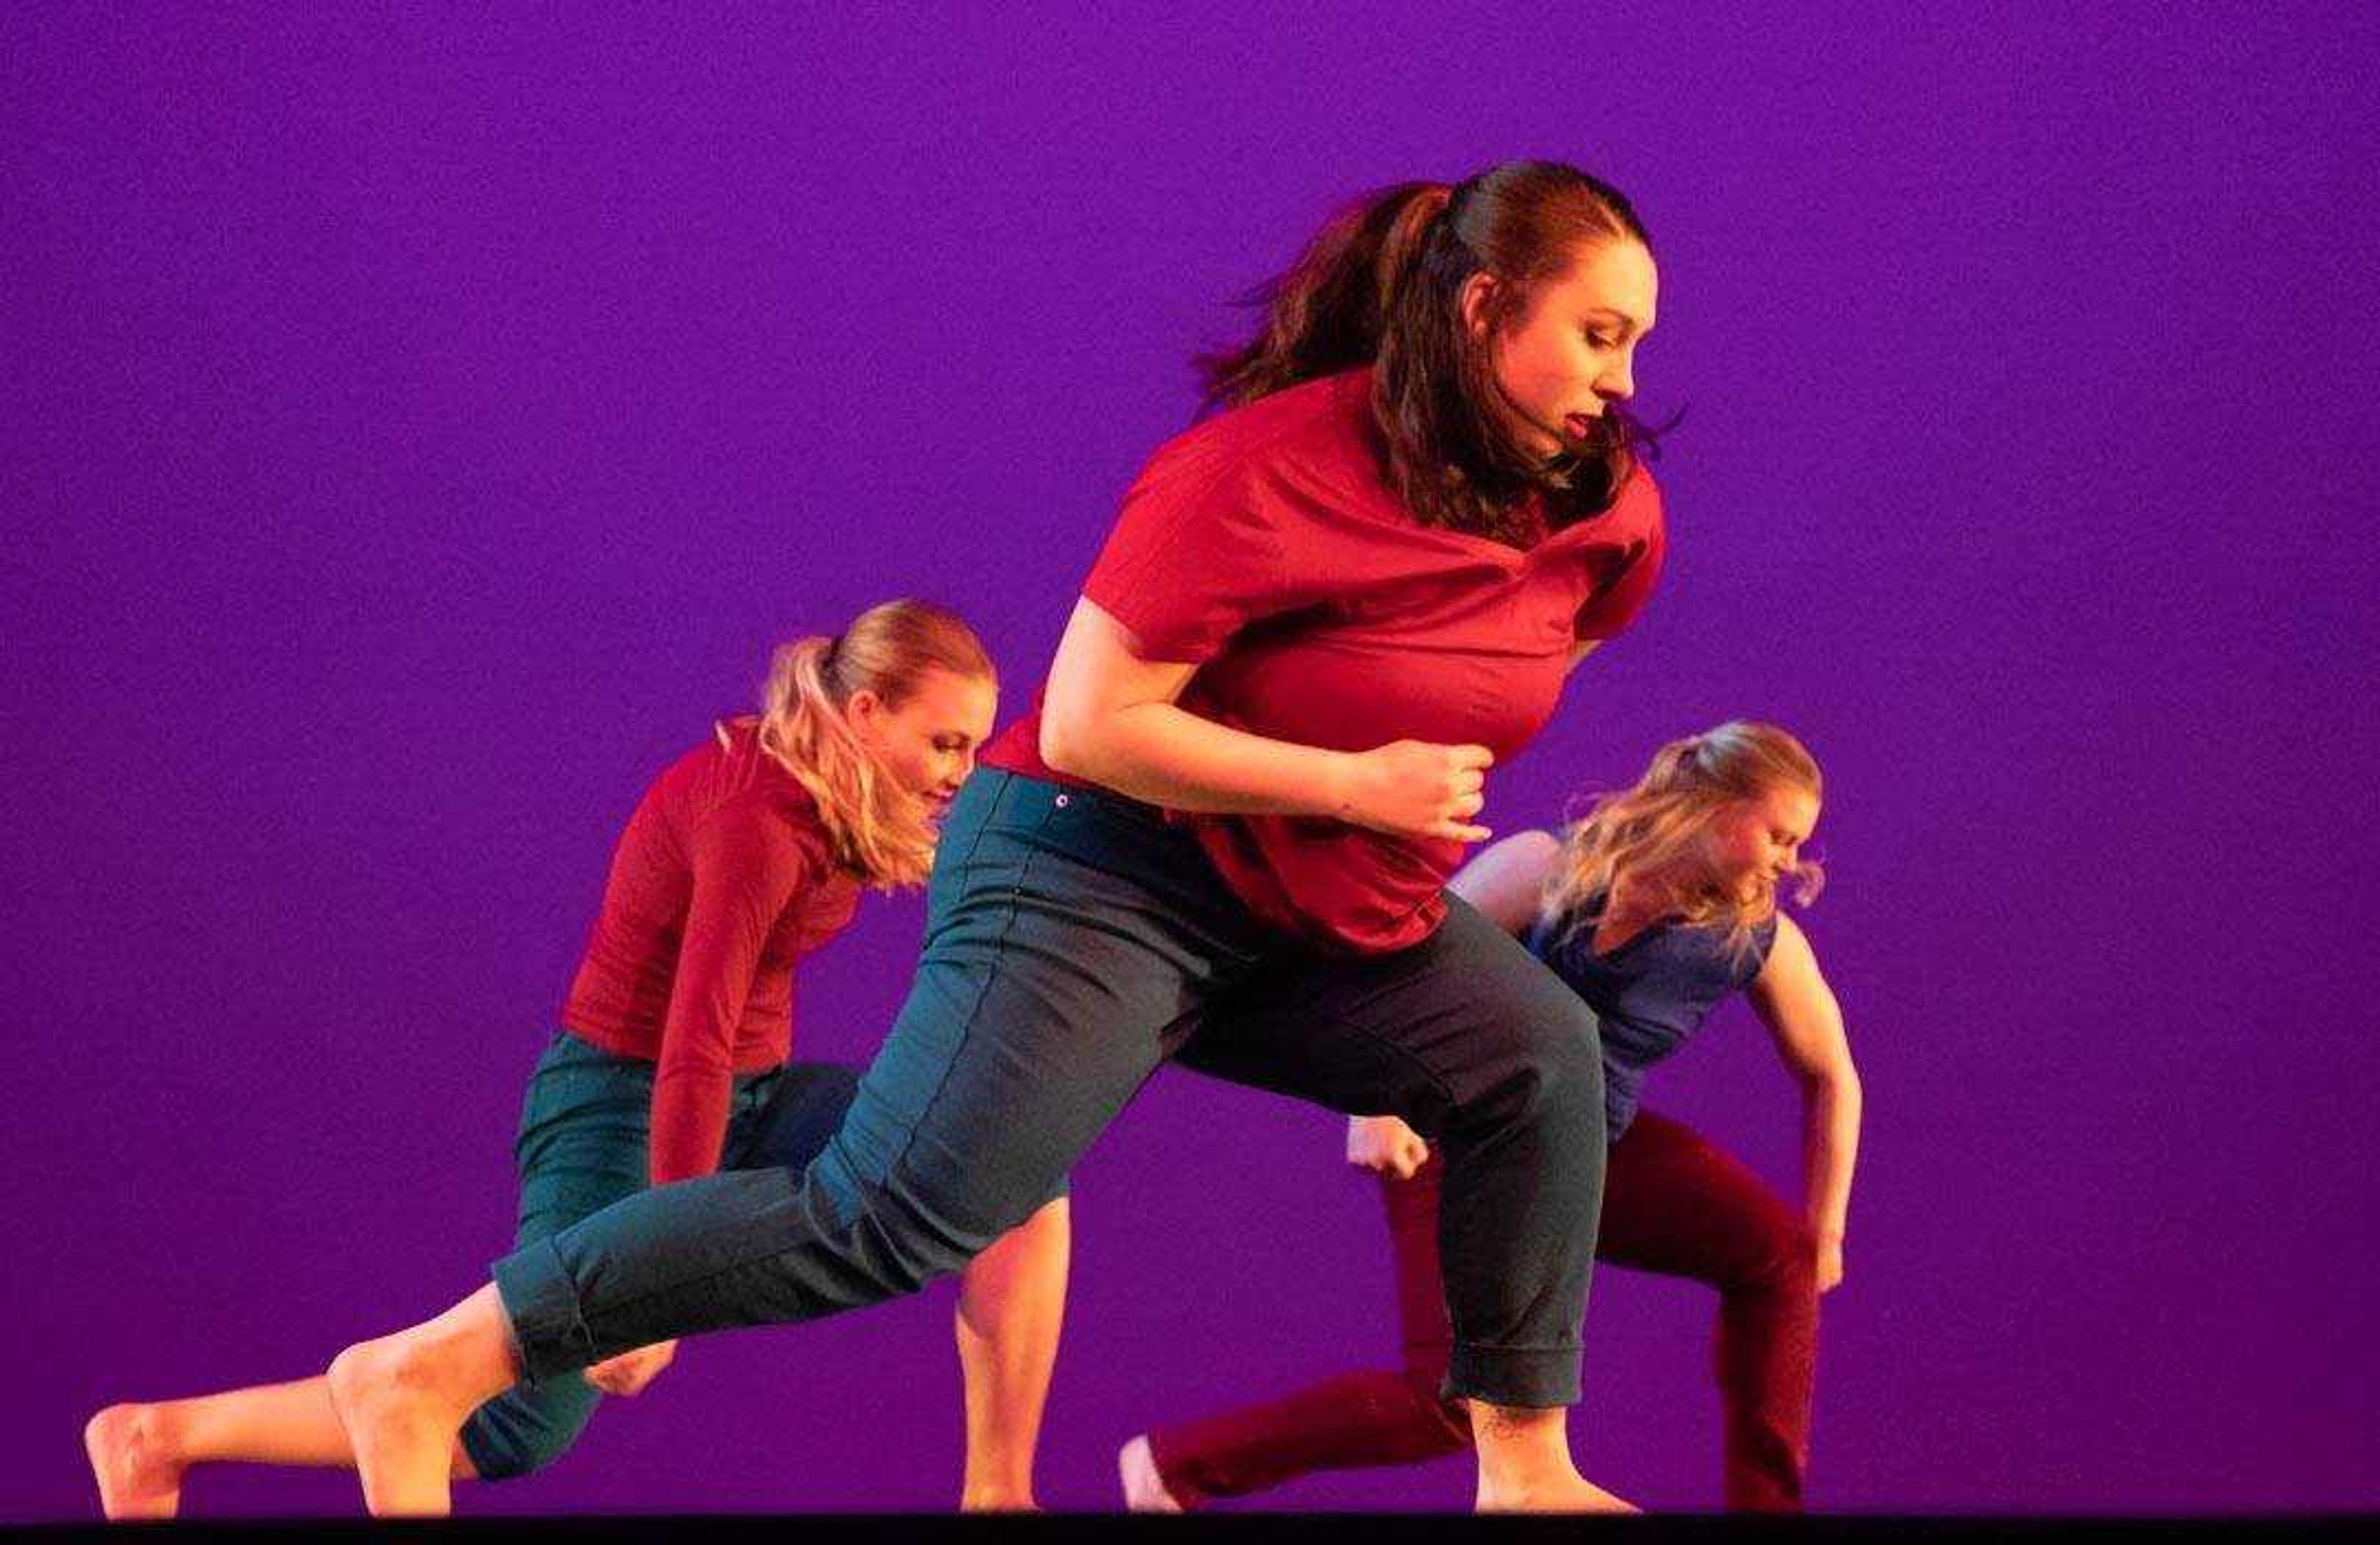 Senior Kaetlin Lamberson (left), junior Lizzie Madden (center) and junior Chloe Galovich perform in unison in "You Go, I Go," choreographed by guest artist Autumn Eckman, during a Spring into Dance dress rehearsal.